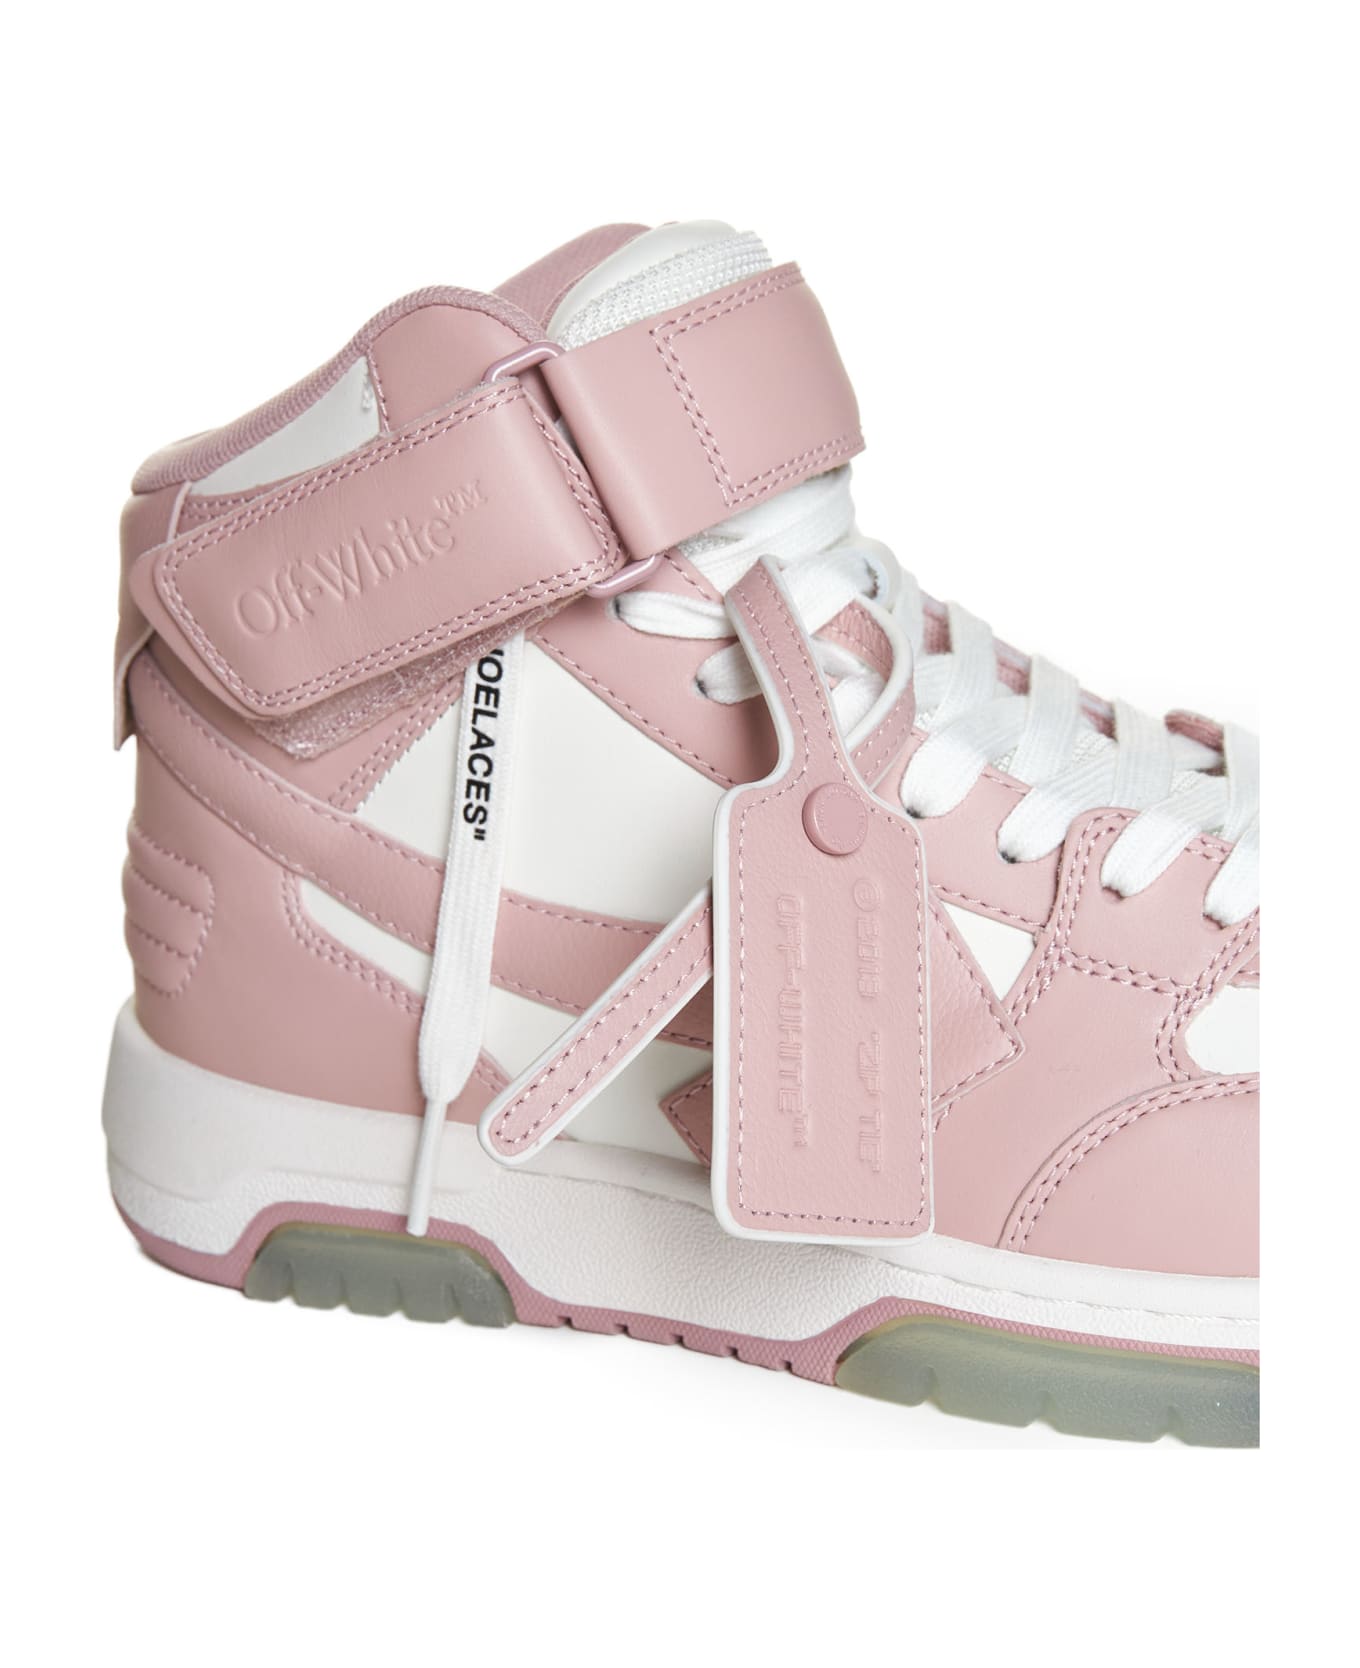 Off-White Out Of Office Mid Sneakers - White pink スニーカー